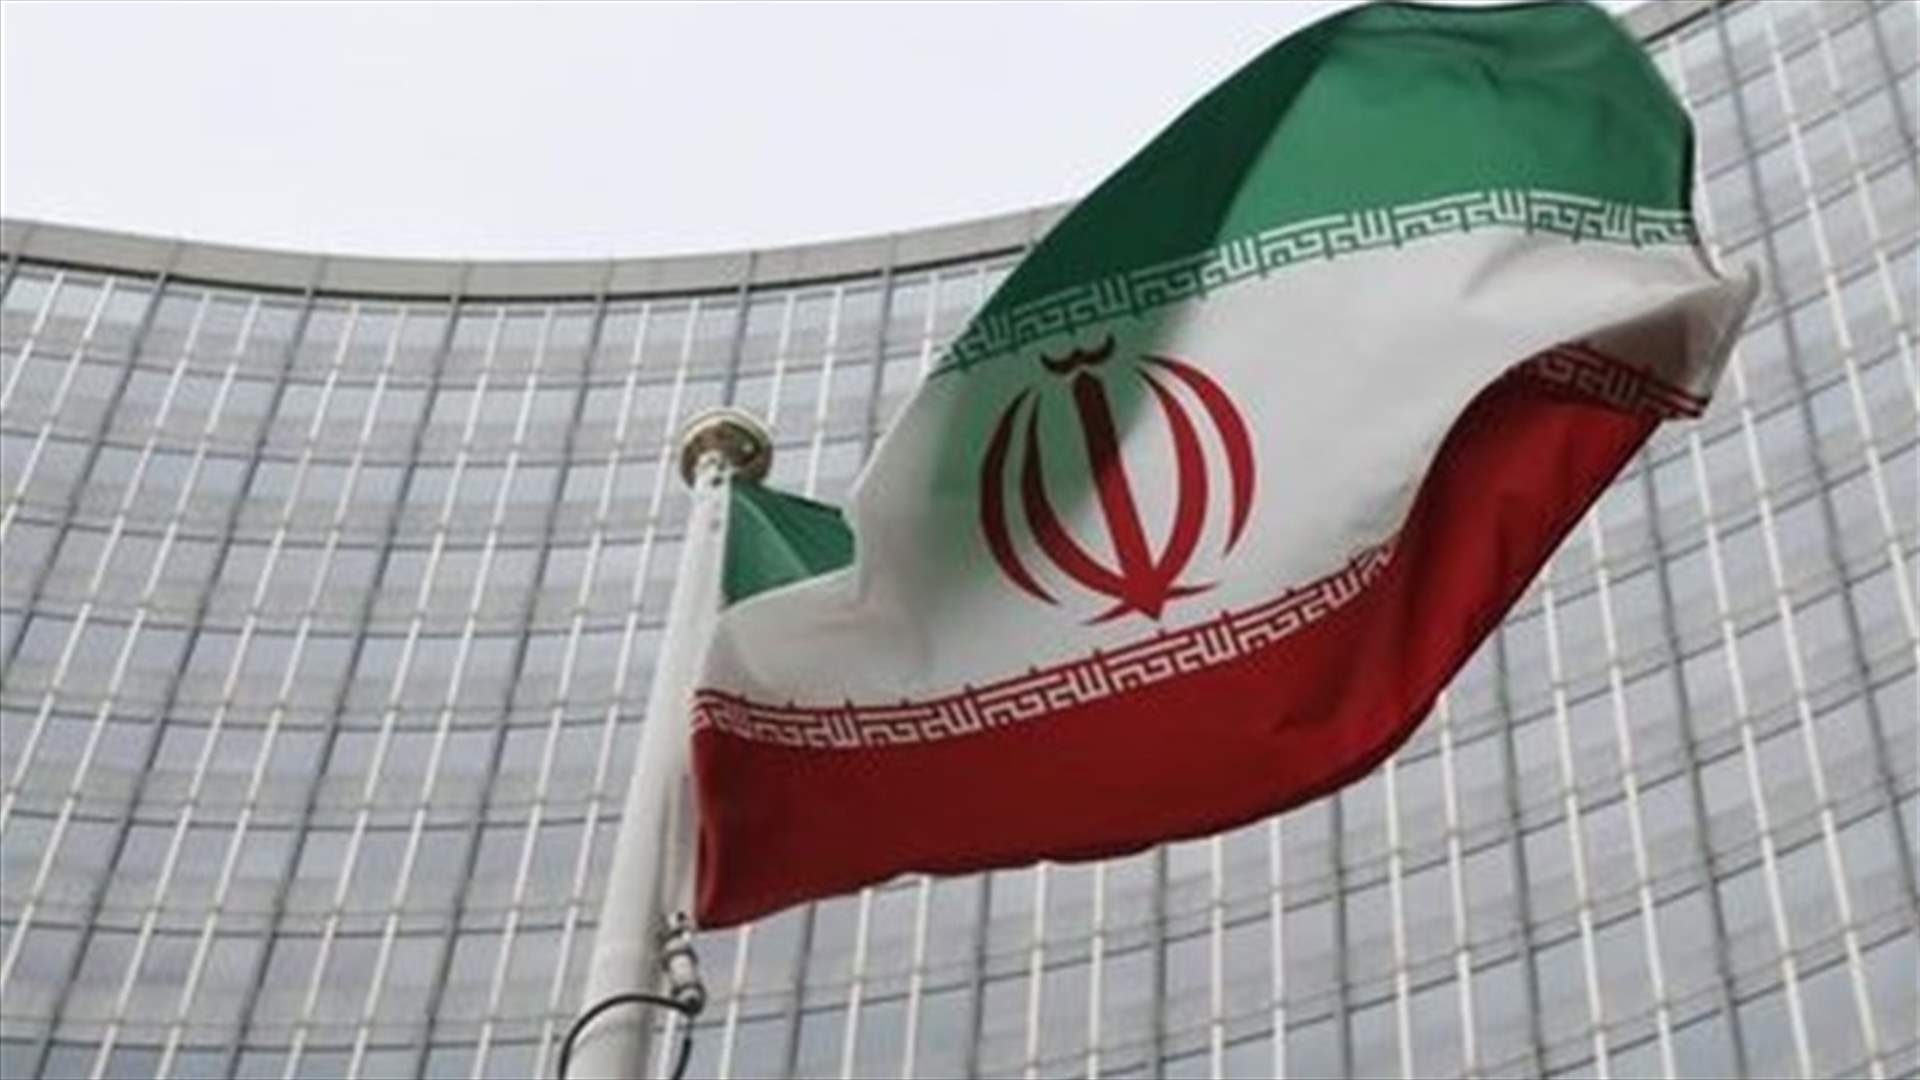 UN watchdog says Iran is endangering support for nuclear deal